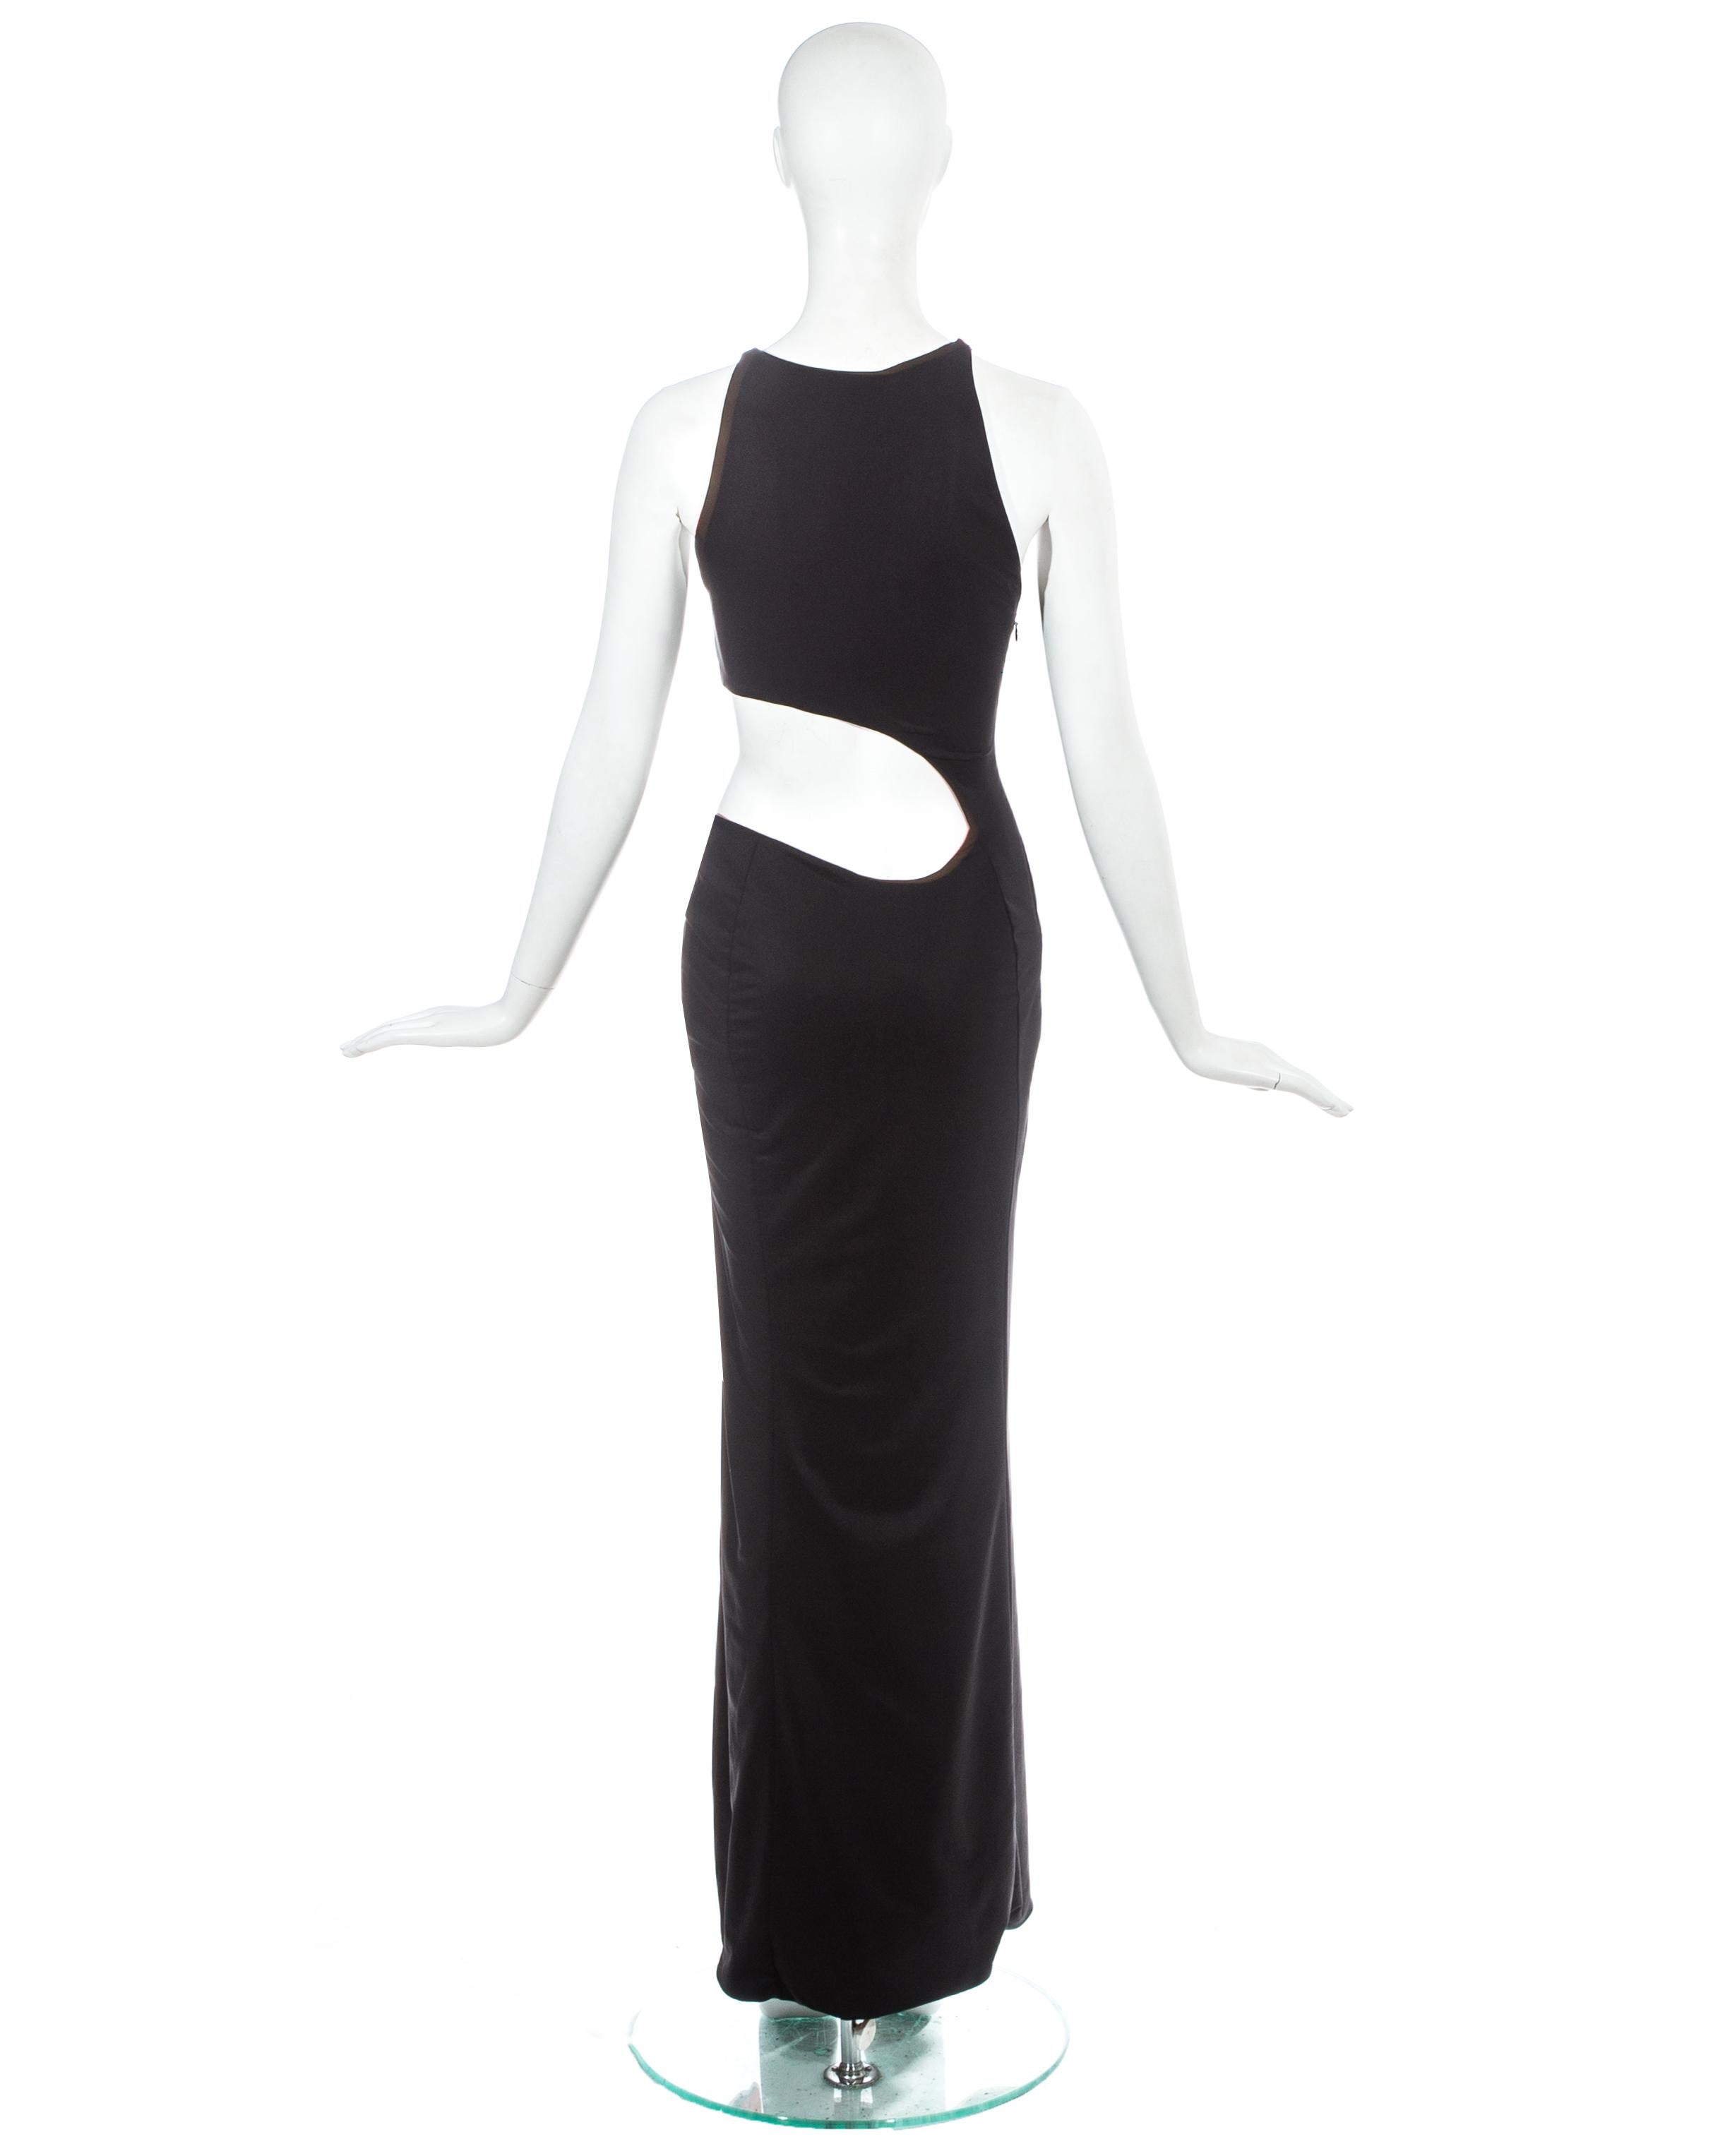 Gianni Versace black jersey evening dress with cut out and leg slit, ss 1998 2